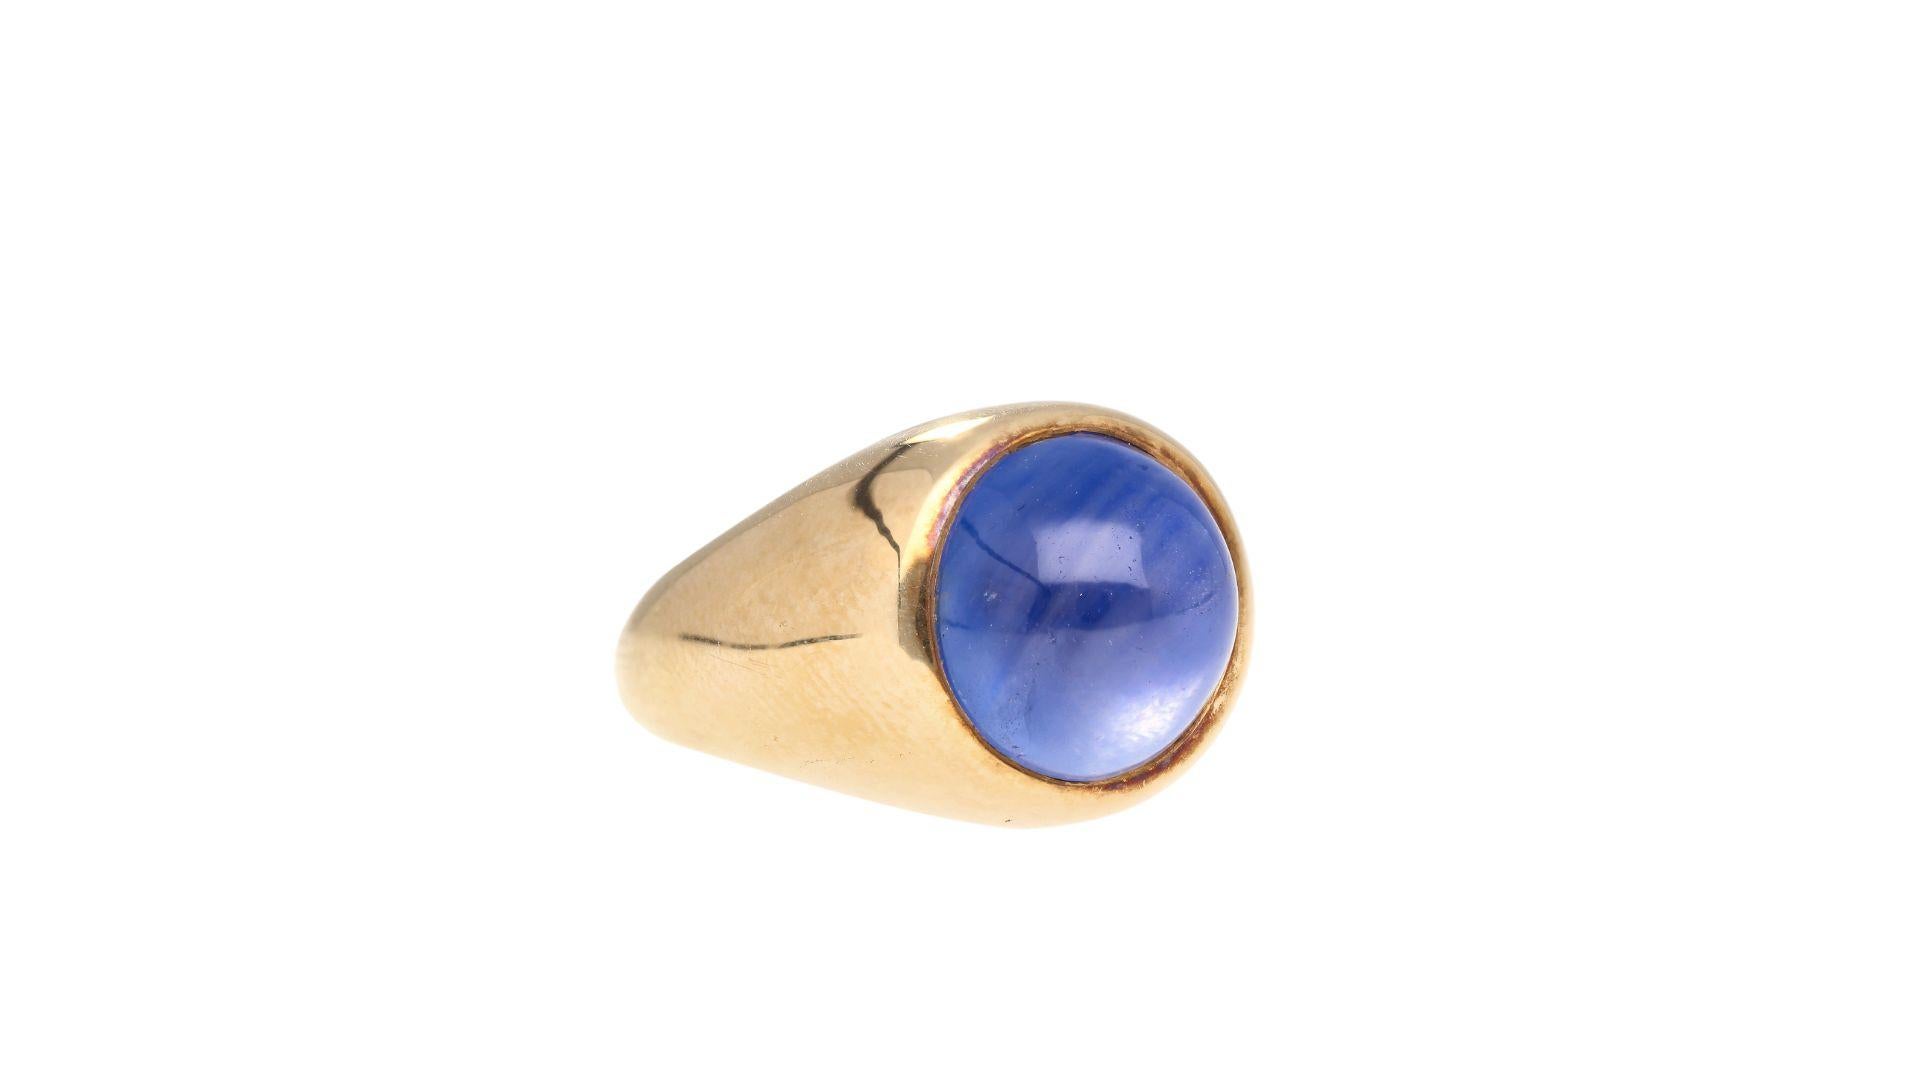 GRS Certified 13.83 carat cabochon cut no heat Blue Star Sapphire in 18k yellow gold bezel solitaire ring. The Sapphire originates from Sri Lanka and features a moderate star effect under direct light. Rich color with very good distribution.